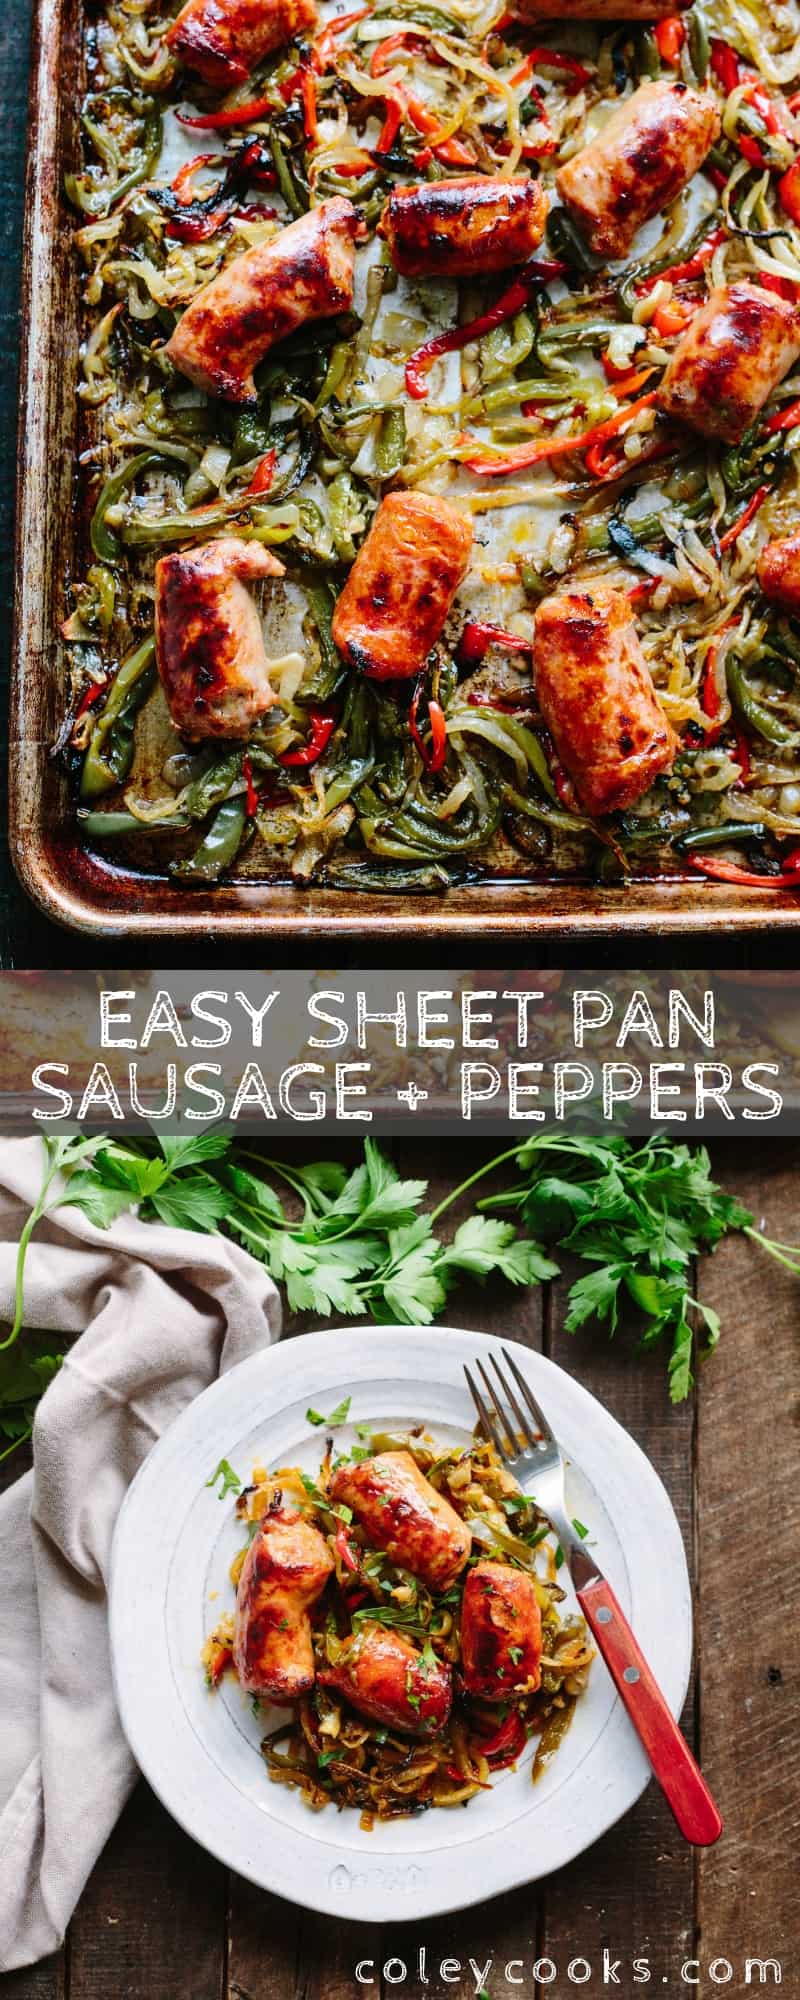 This recipe for classic Italian sausage and peppers is made easier and better by roasting the whole thing on a sheet pan! Easy prep, easy cleanup, awesome recipe! #easy #glutenfree #italian #recipe #sausage #peppers #sheetpan #dinner| ColeyCooks.com